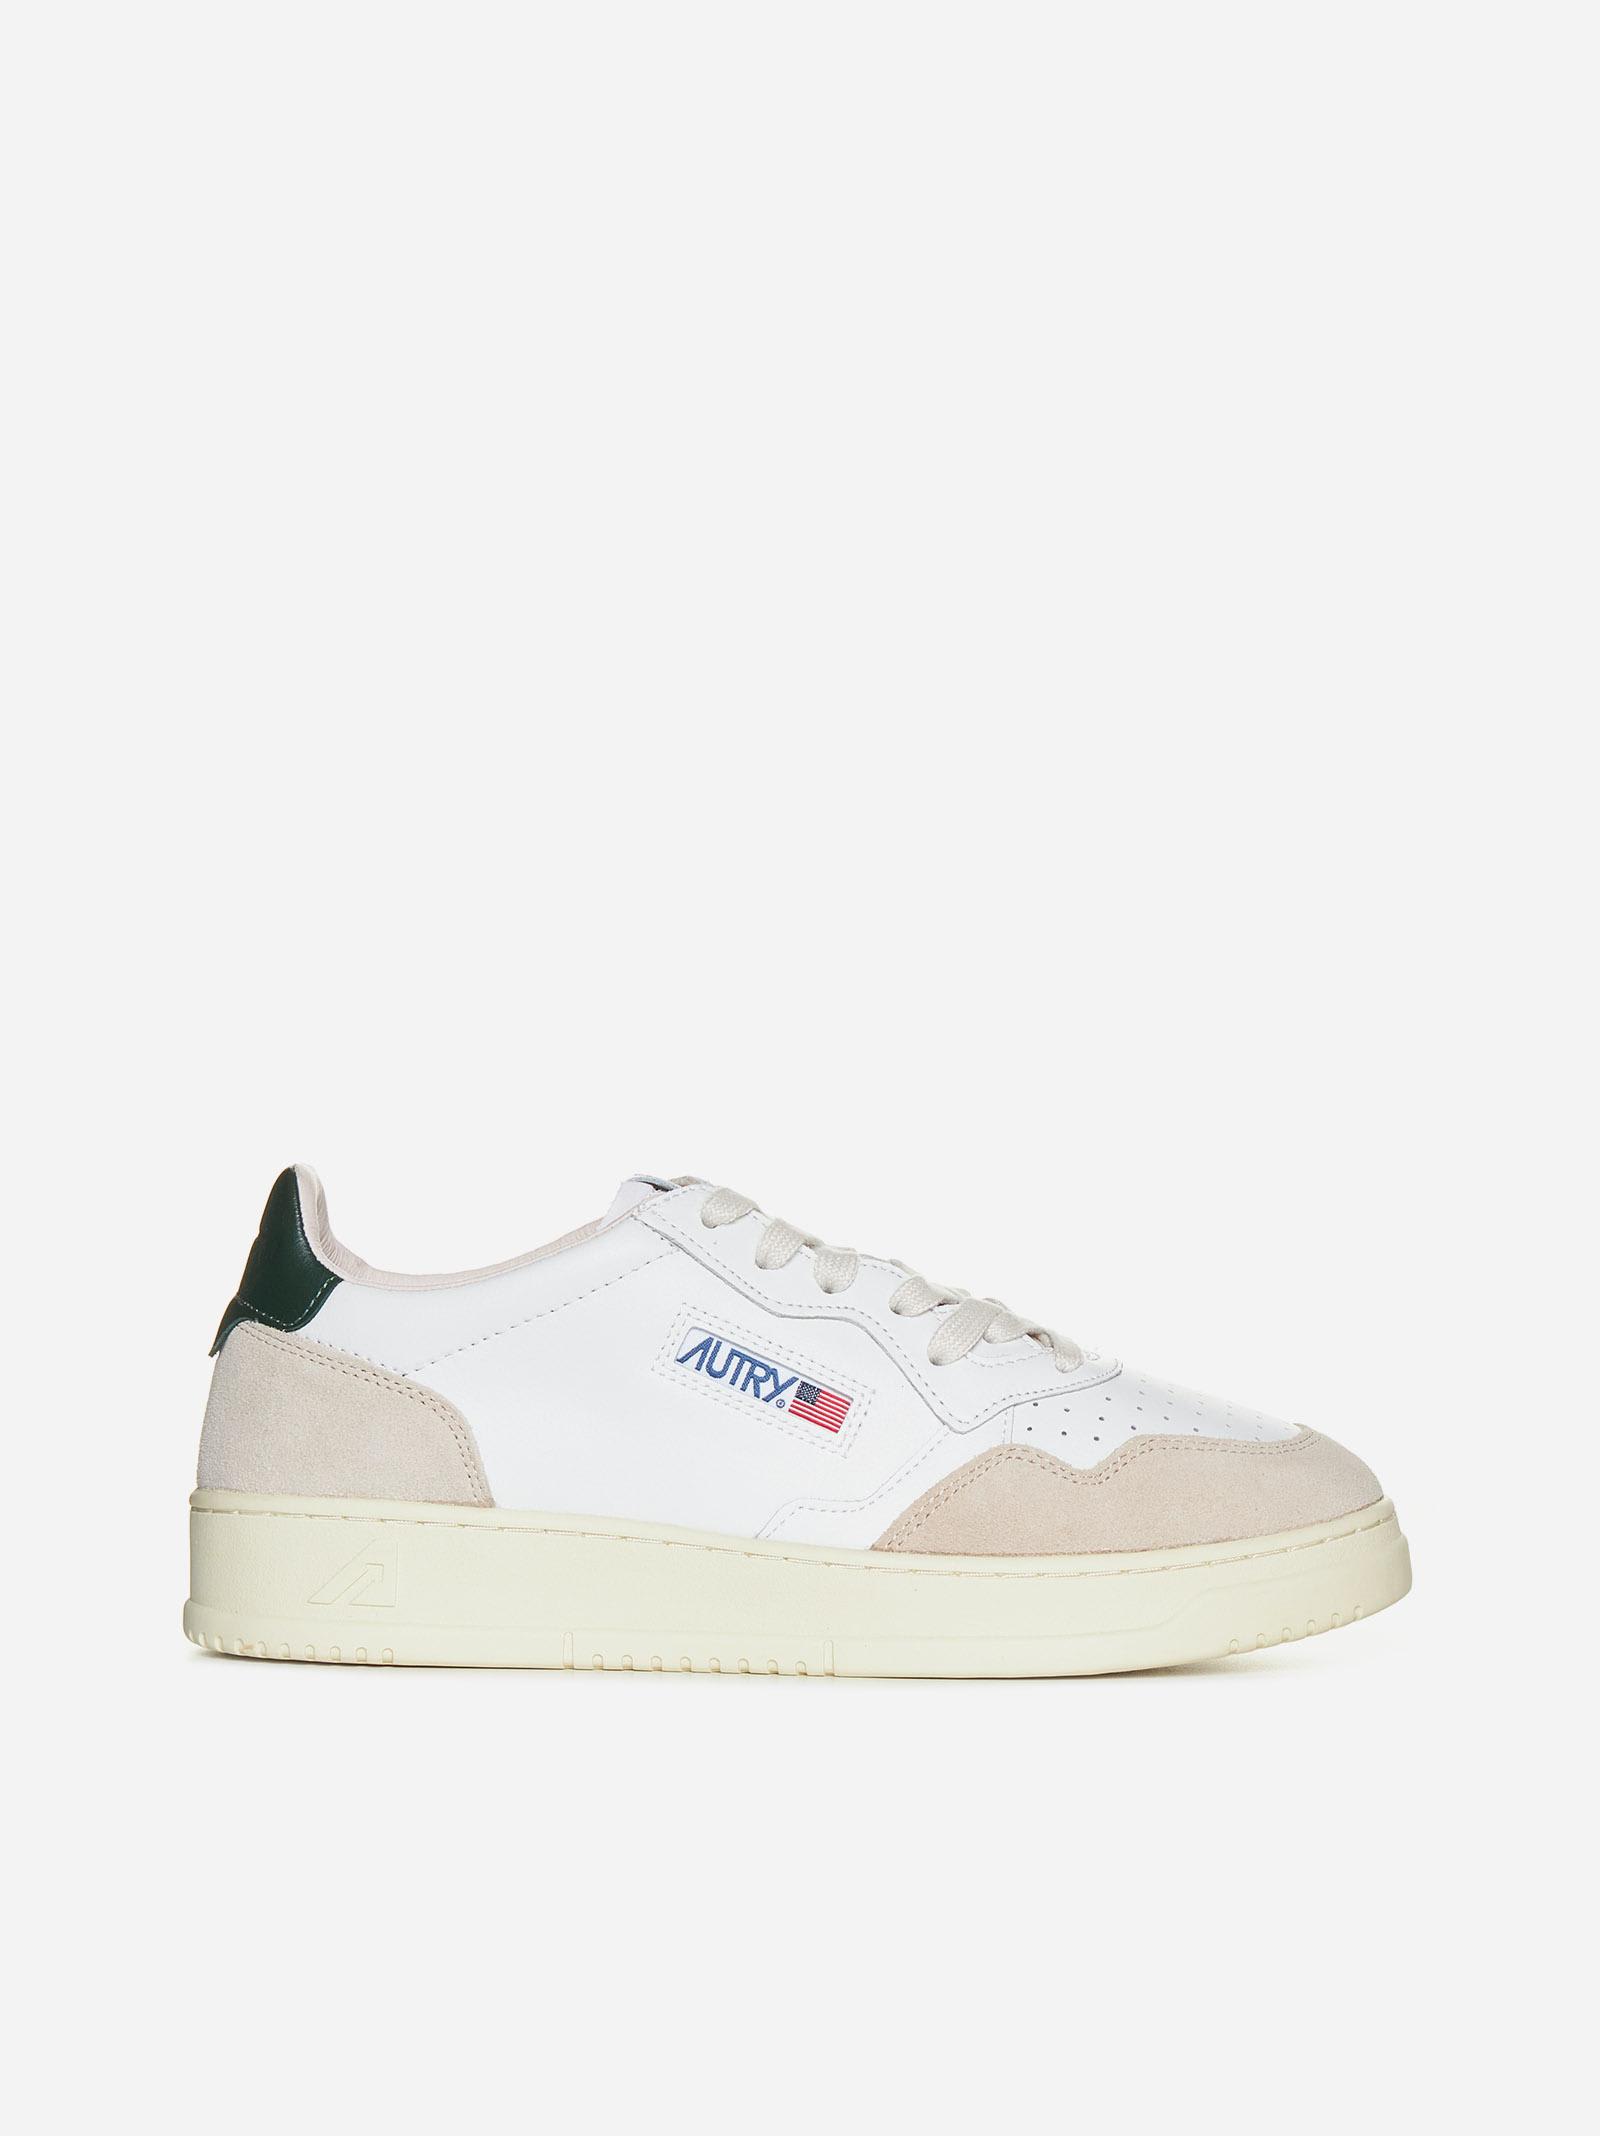 Autry Medalist Leather And Suede Low-top Sneakers In White Mount